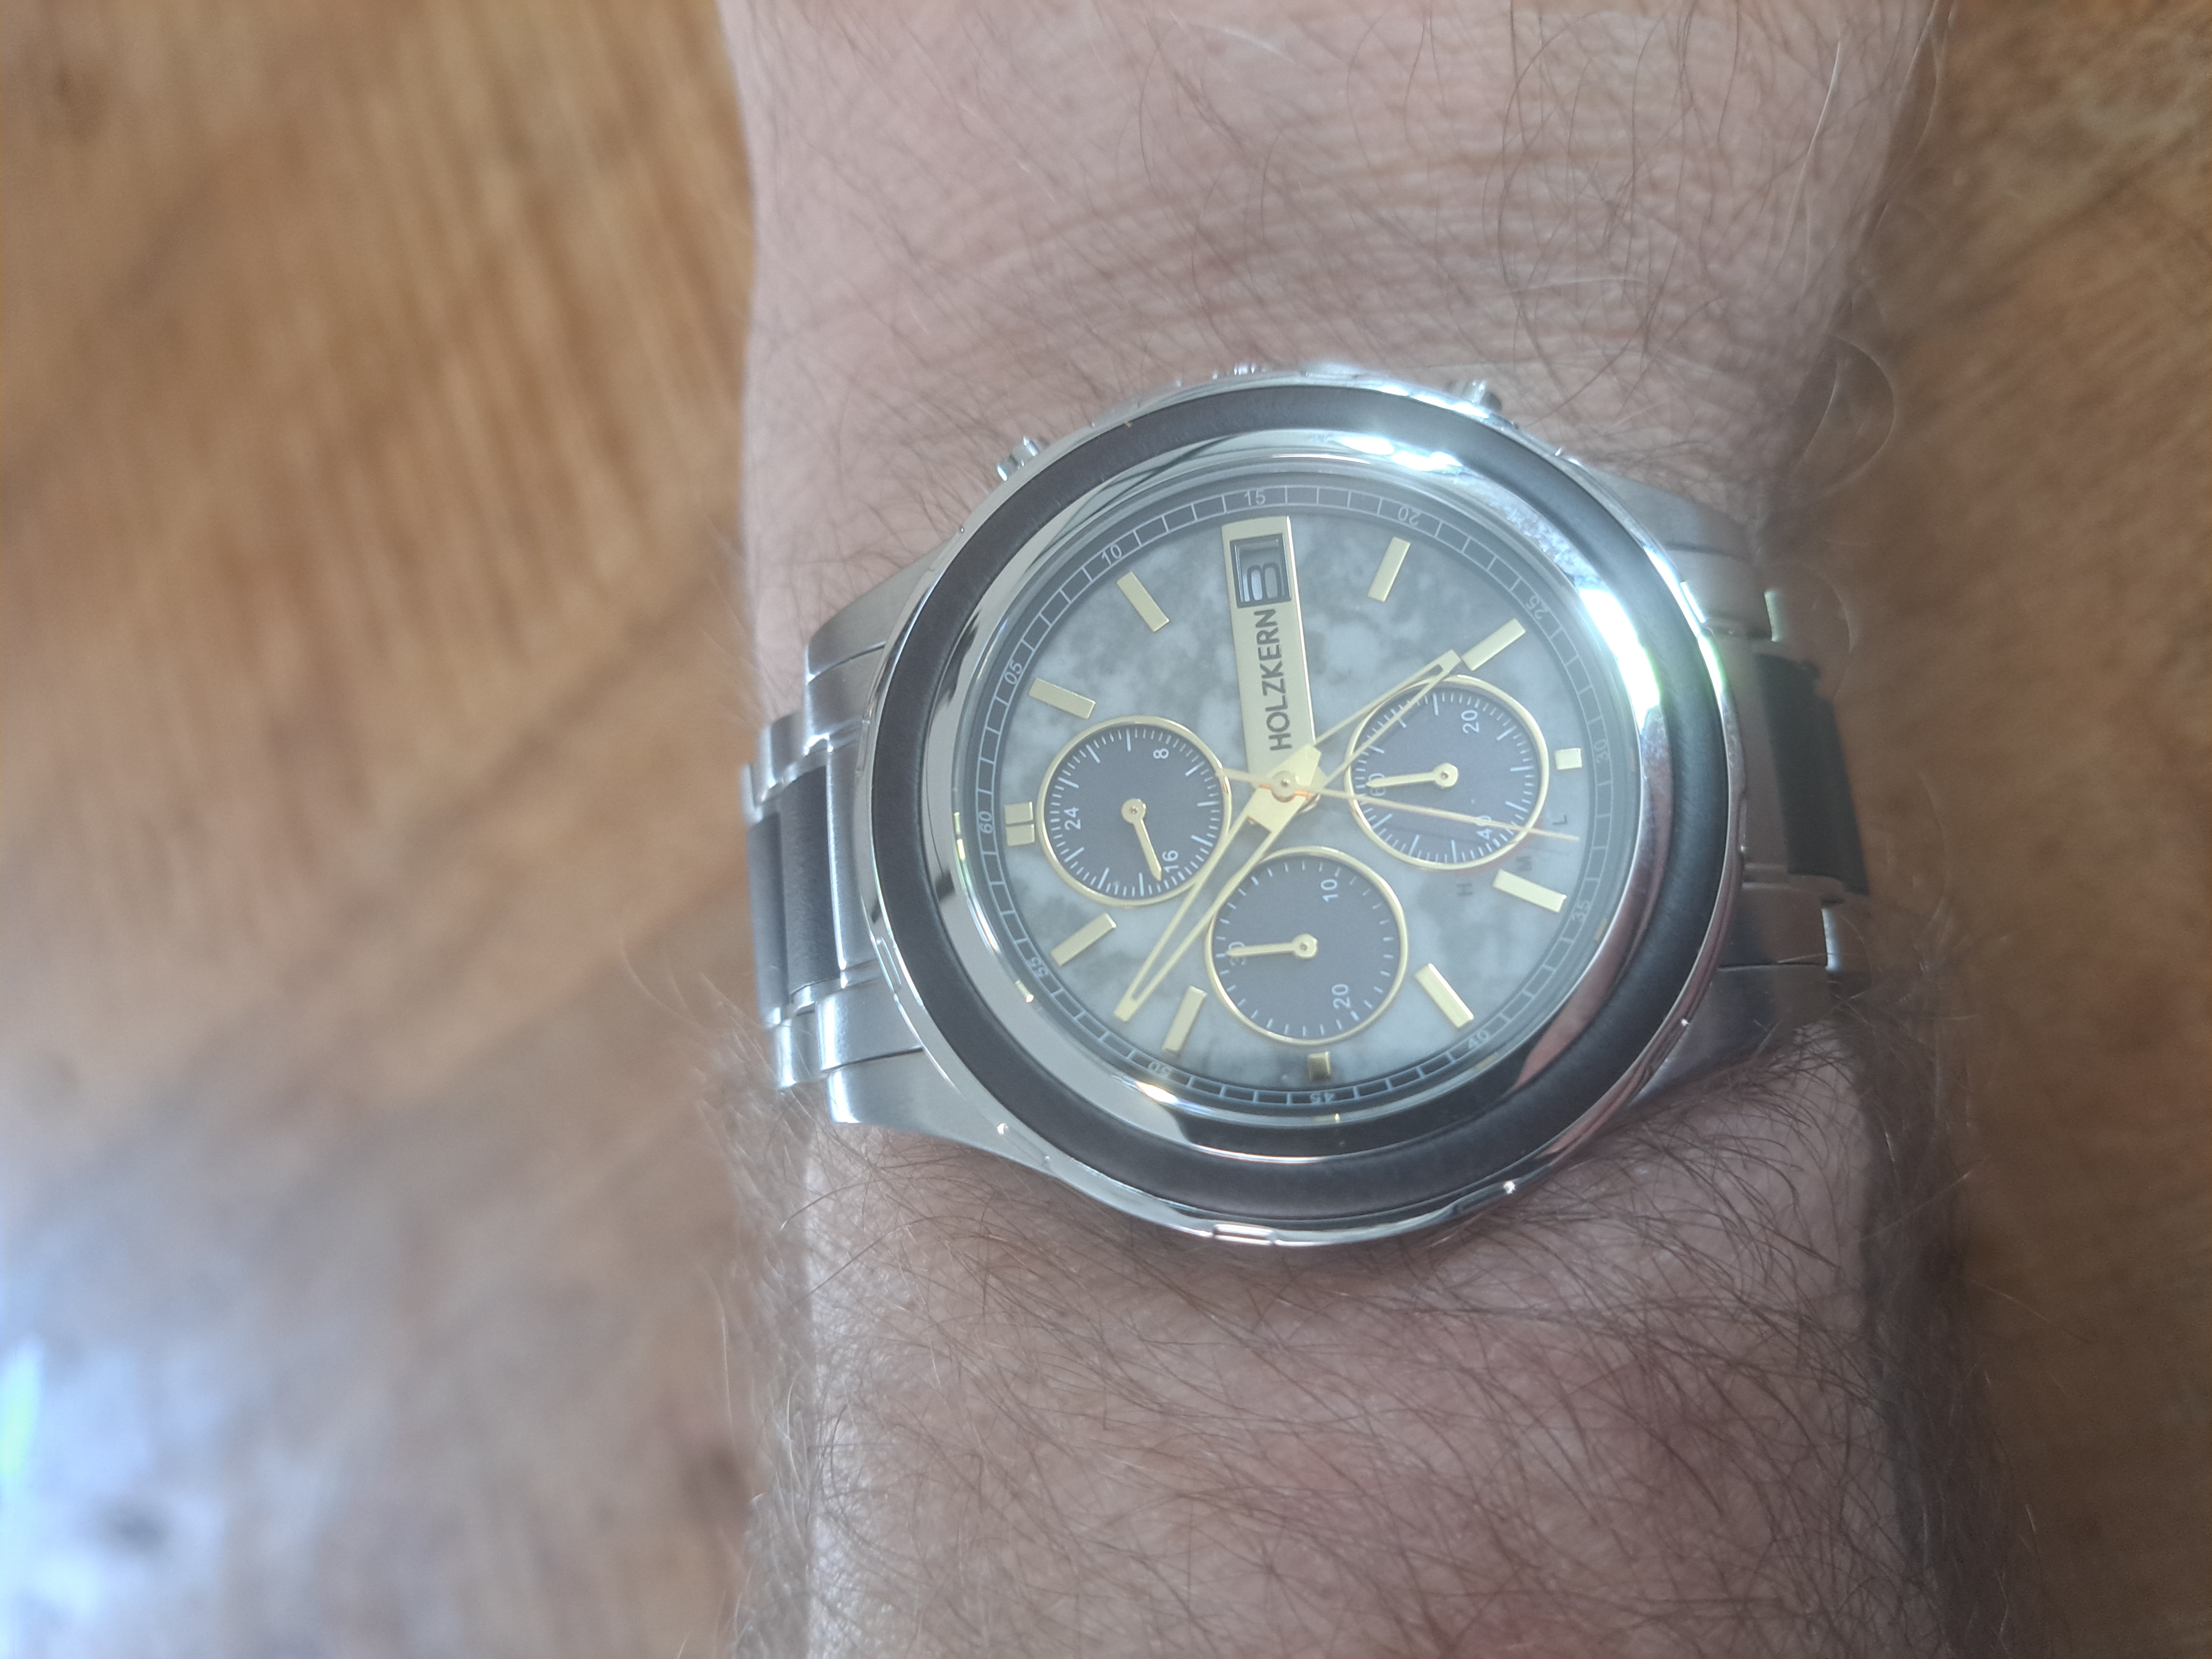 I haven't worn a watch in 15 years, but when I saw this one I had to have it. Very beautiful ...